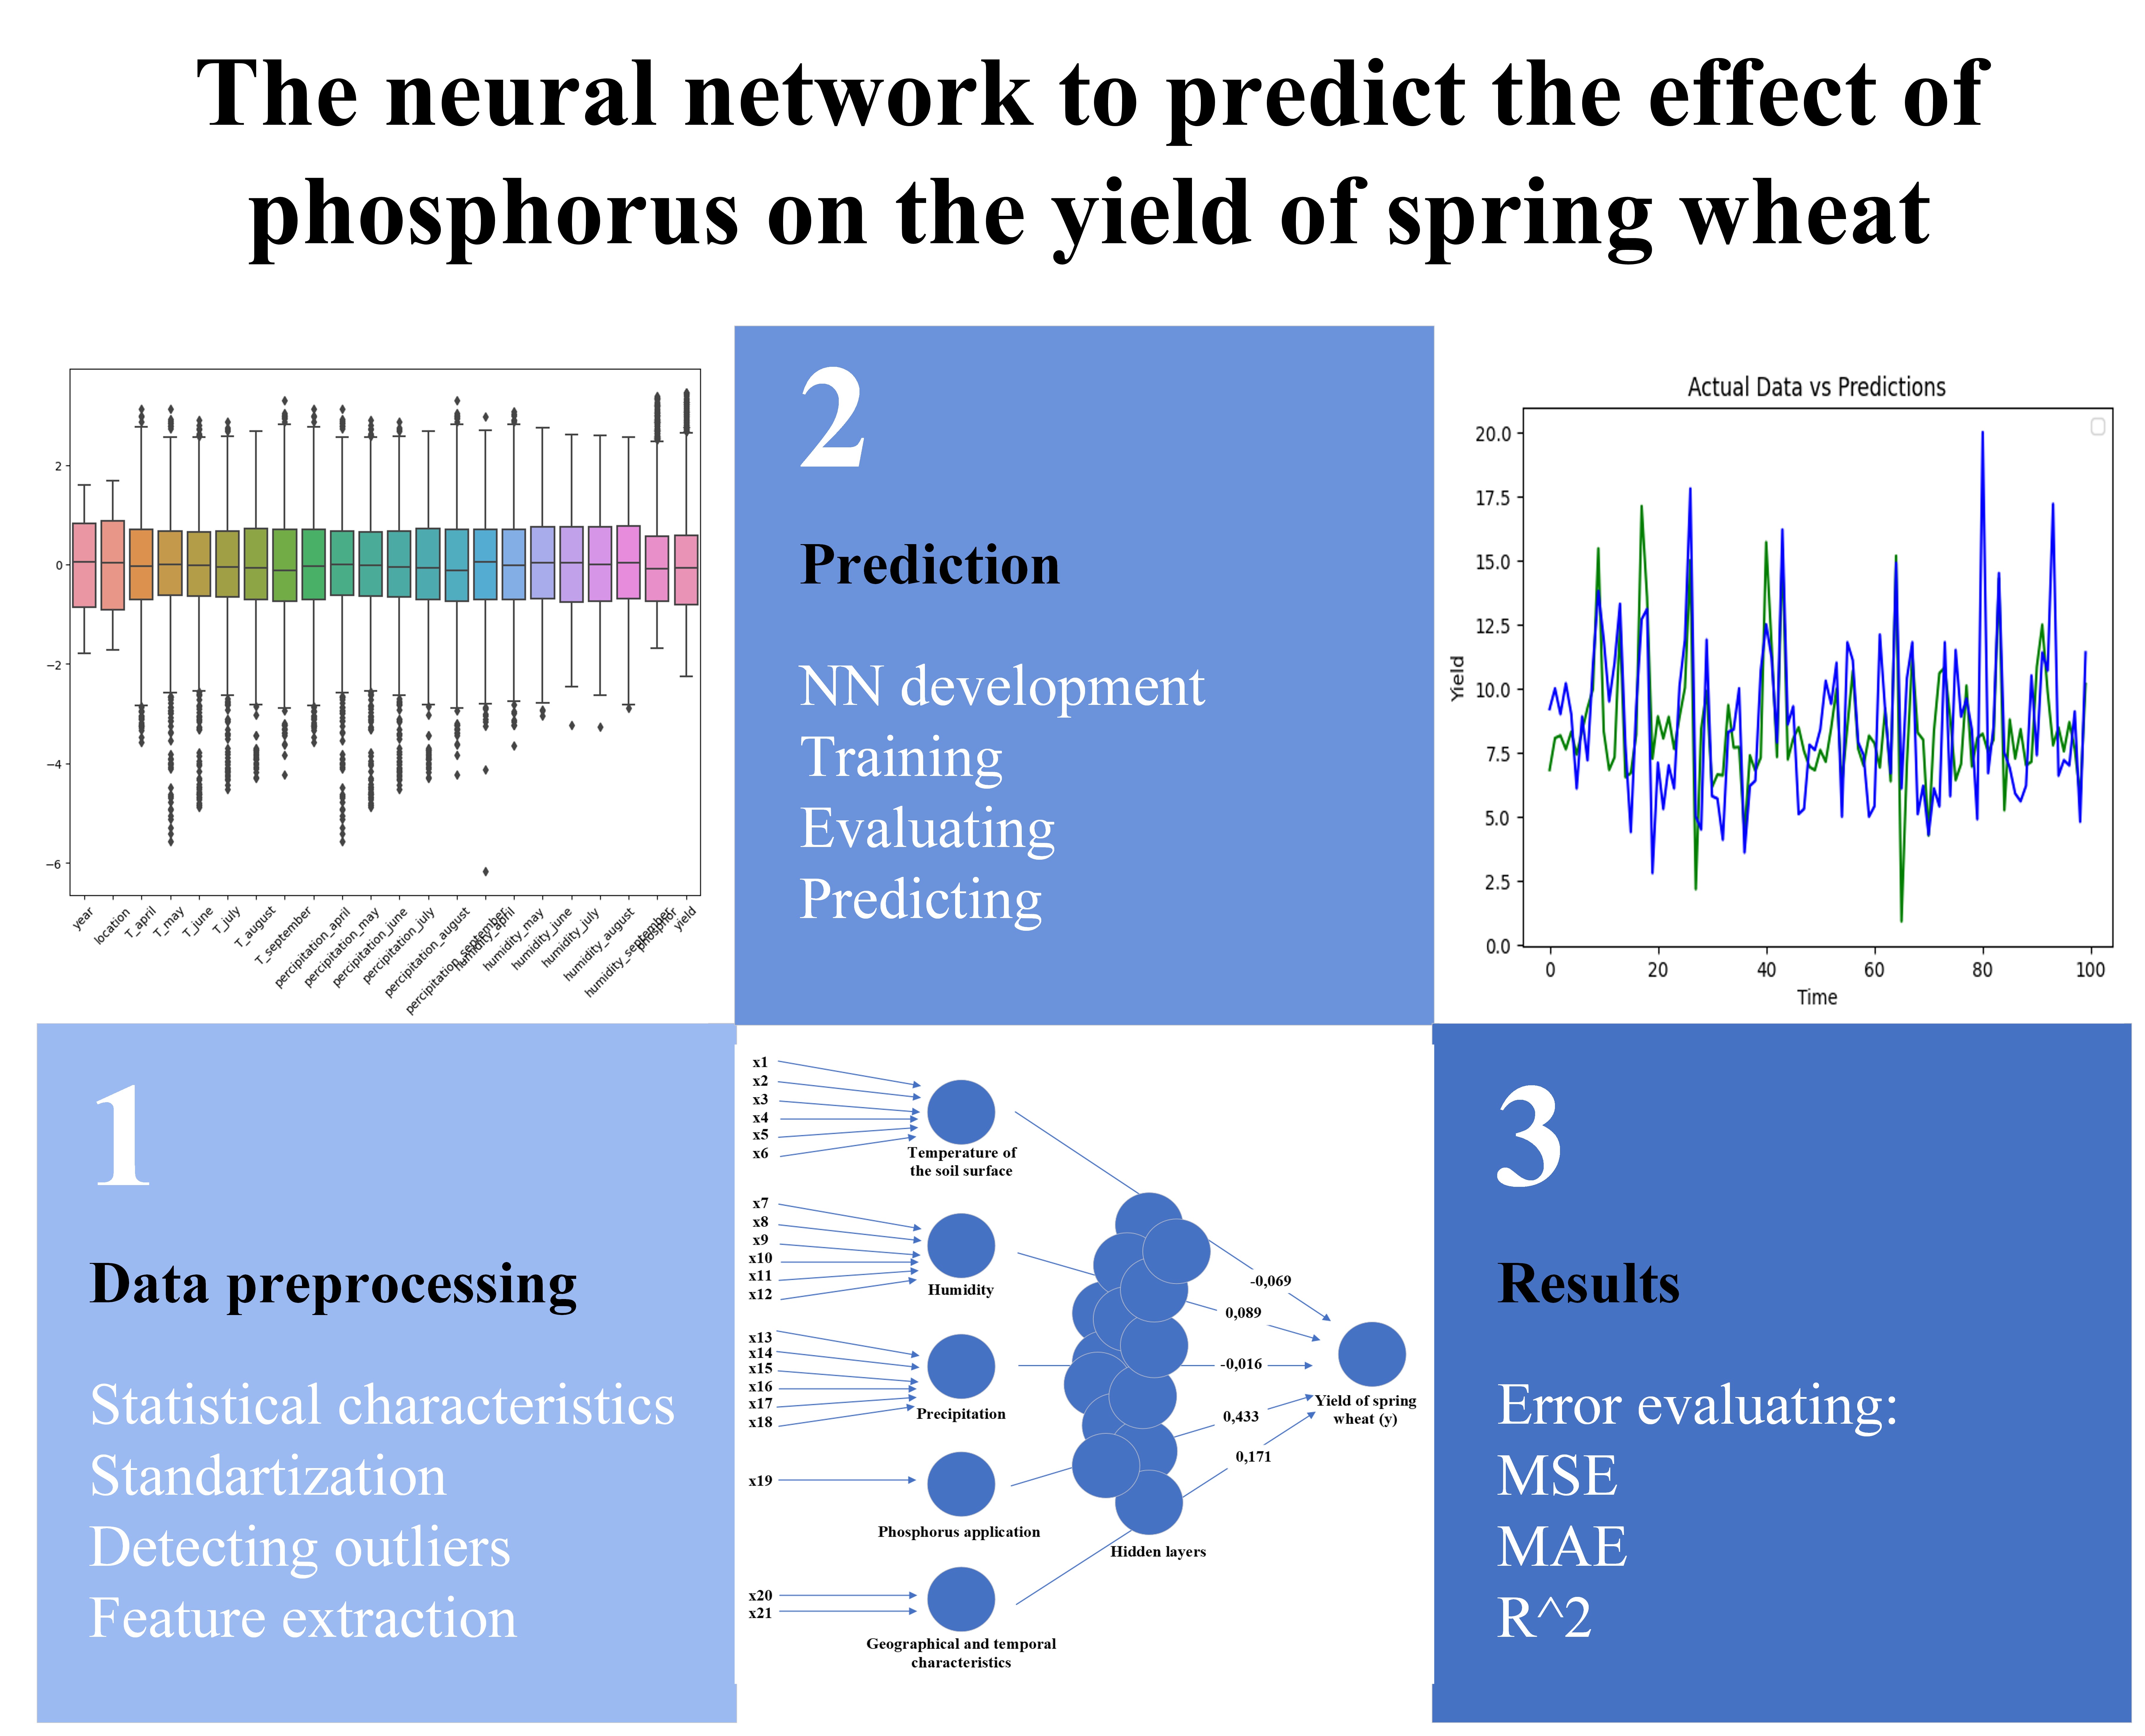 Development of a neural network model for training data on the effects of phosphorus on spring wheat growth